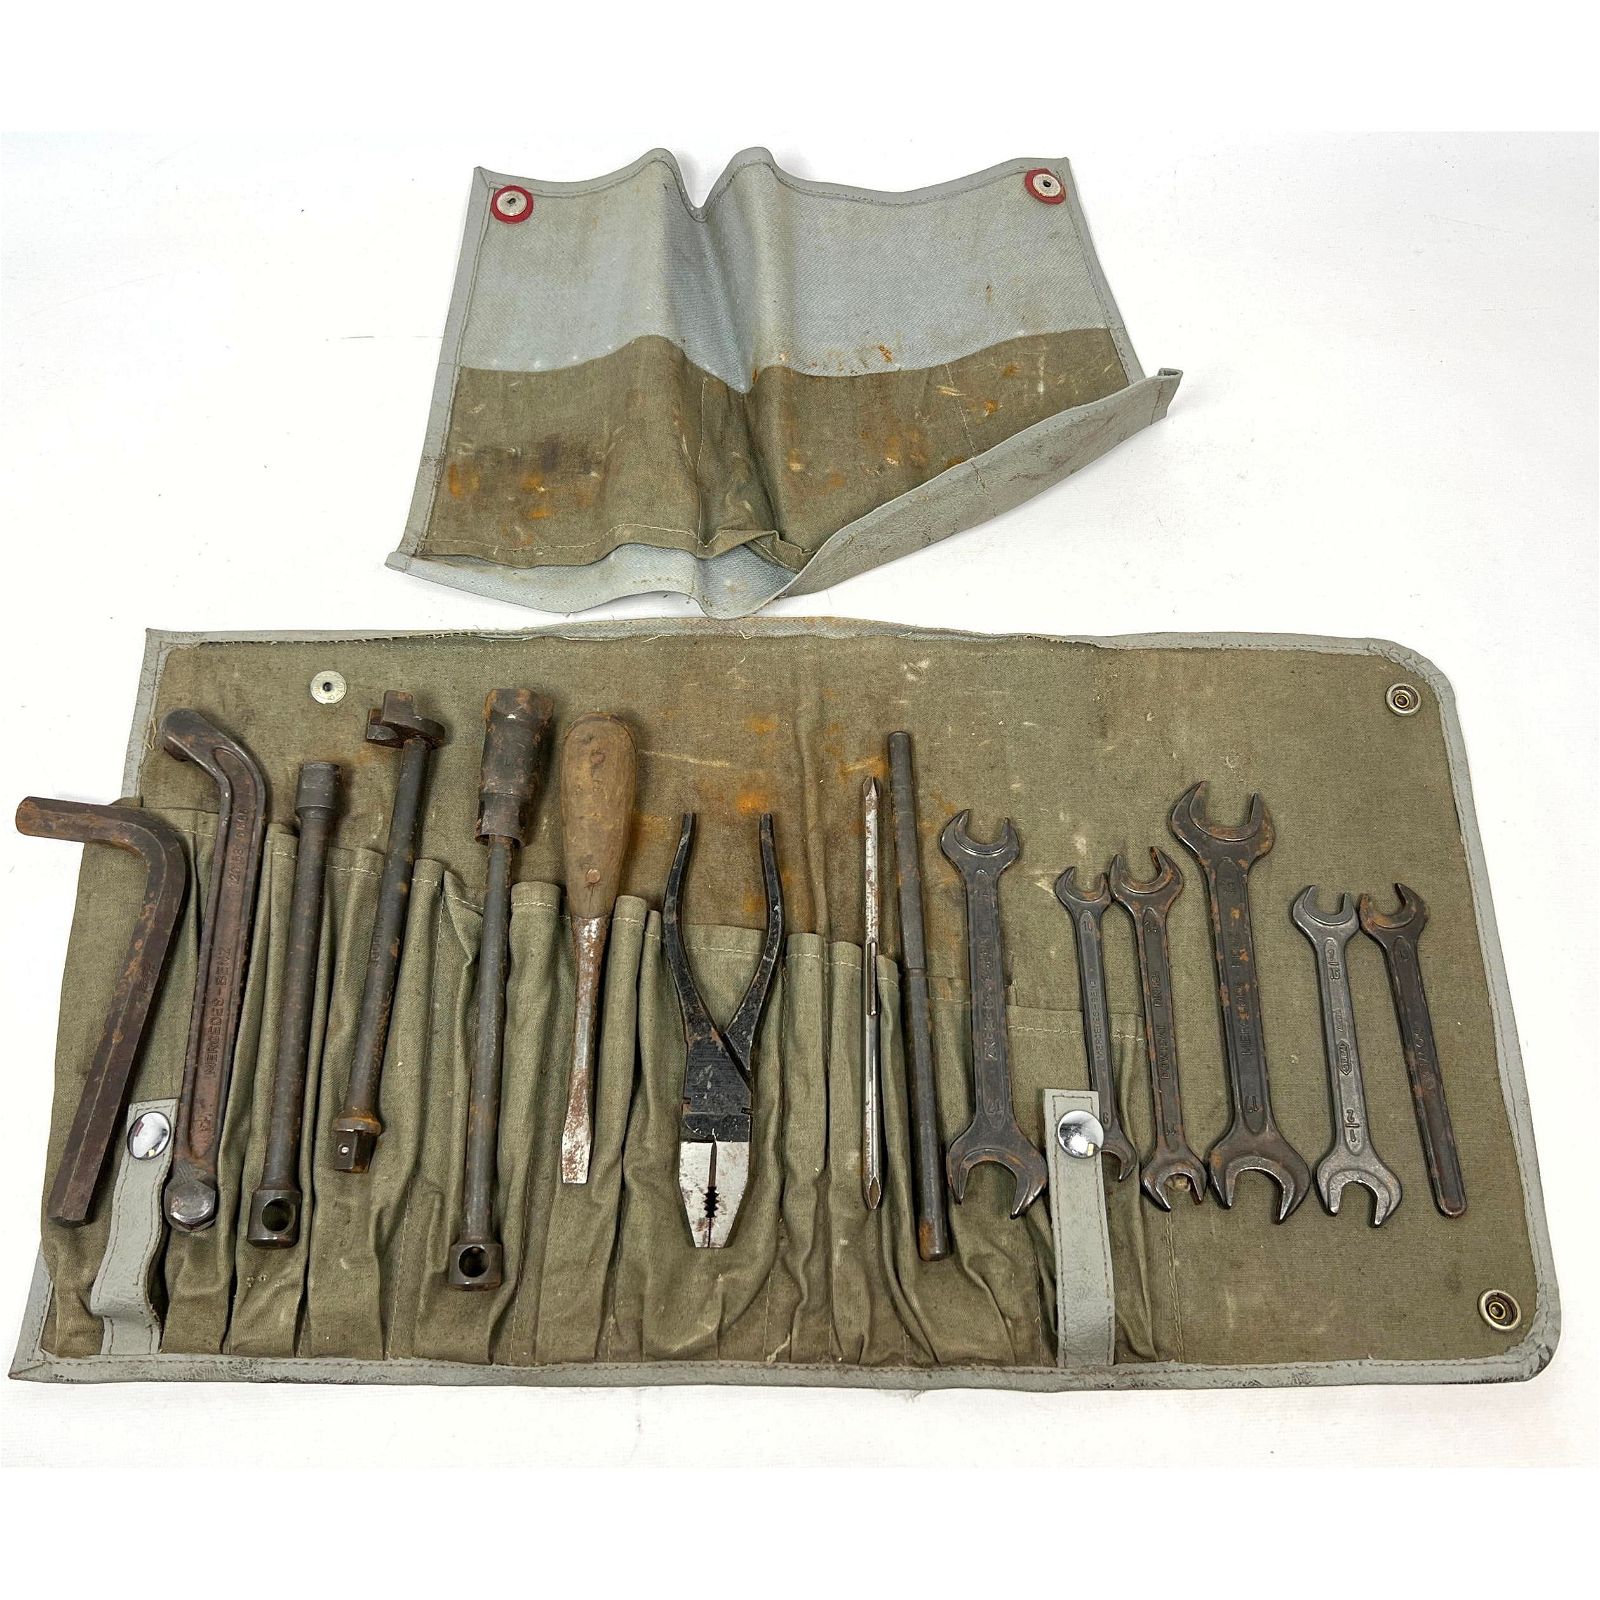 Vintage Mercedes 300 SL tool roll, which hammered for $8,000 and sold for $10,240 with buyer’s premium at Uniques and Antiques.